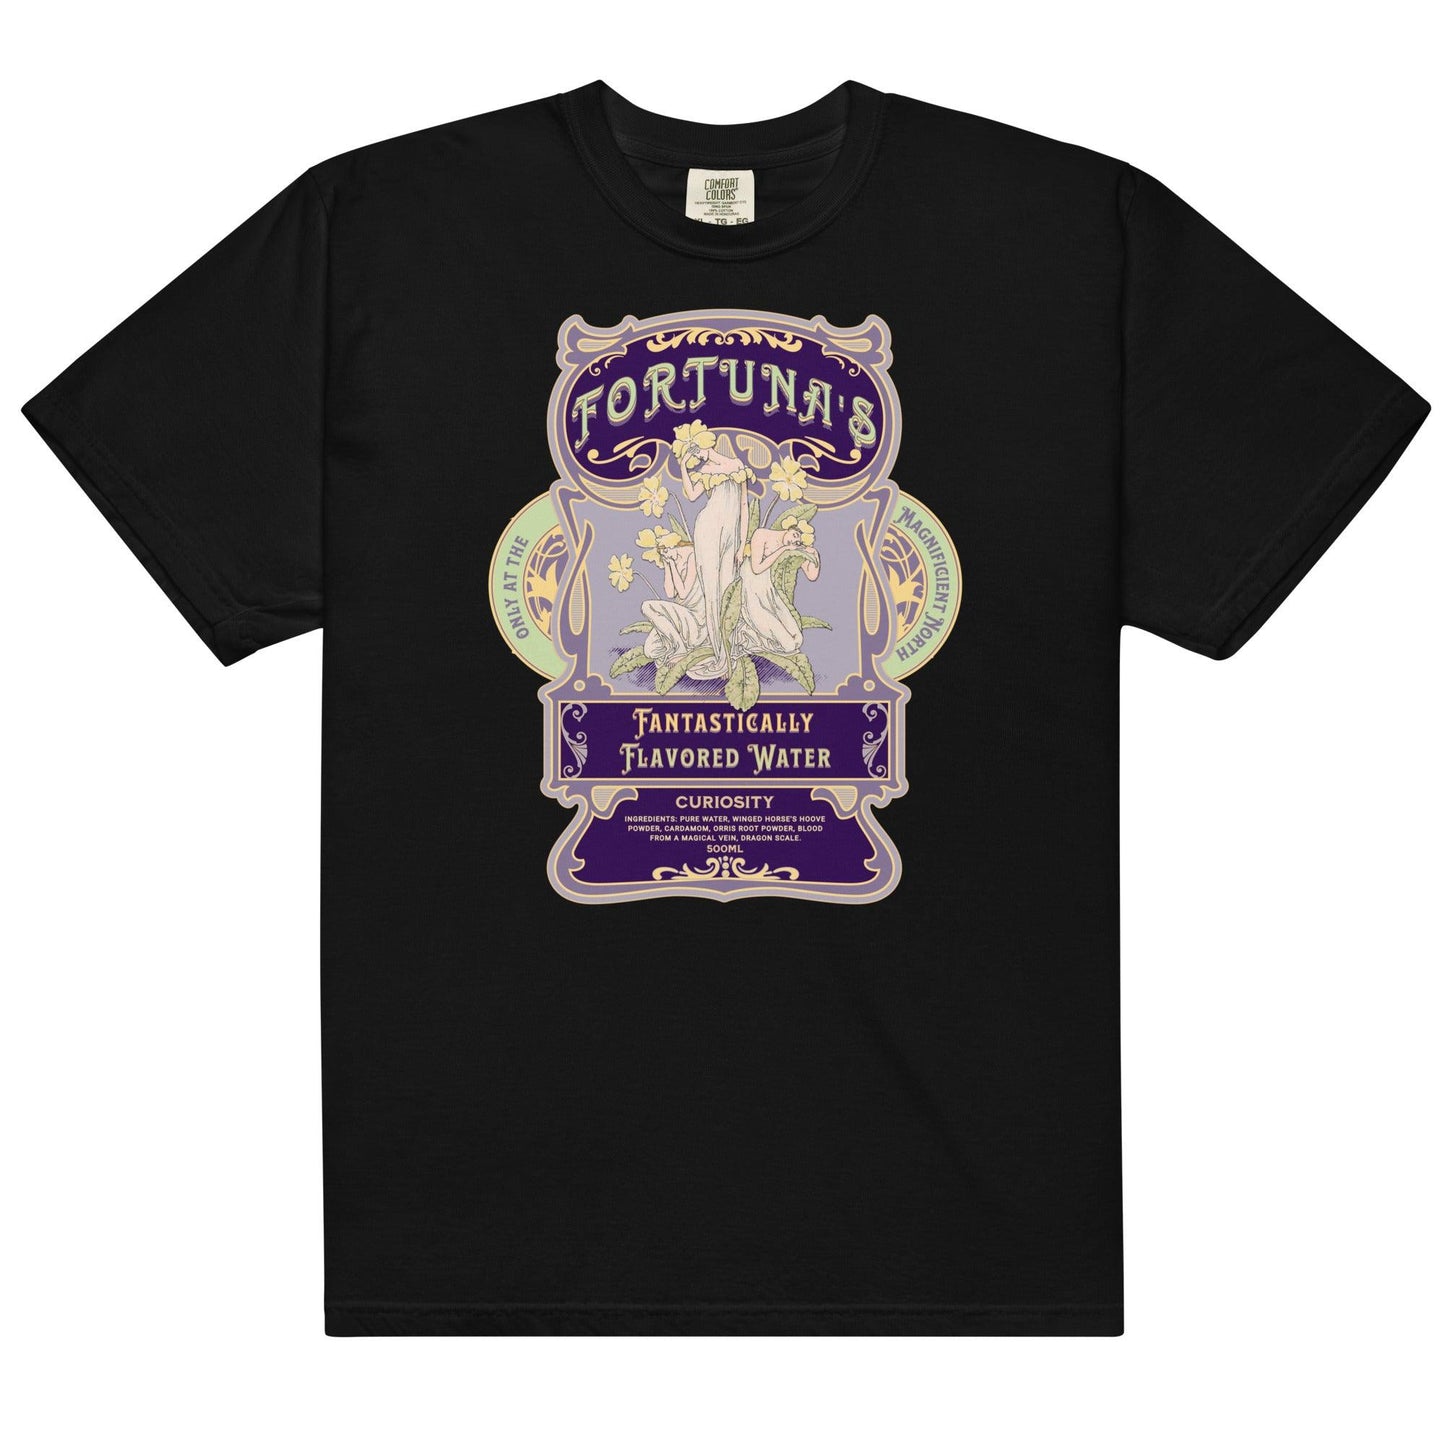 Fortuna's Fantastically Flavored Water T-Shirt - The Bean Workshop - evangeline fox, jacks prince of hearts, once upon a broken heart, ouabh, stephanie garber, t-shirt